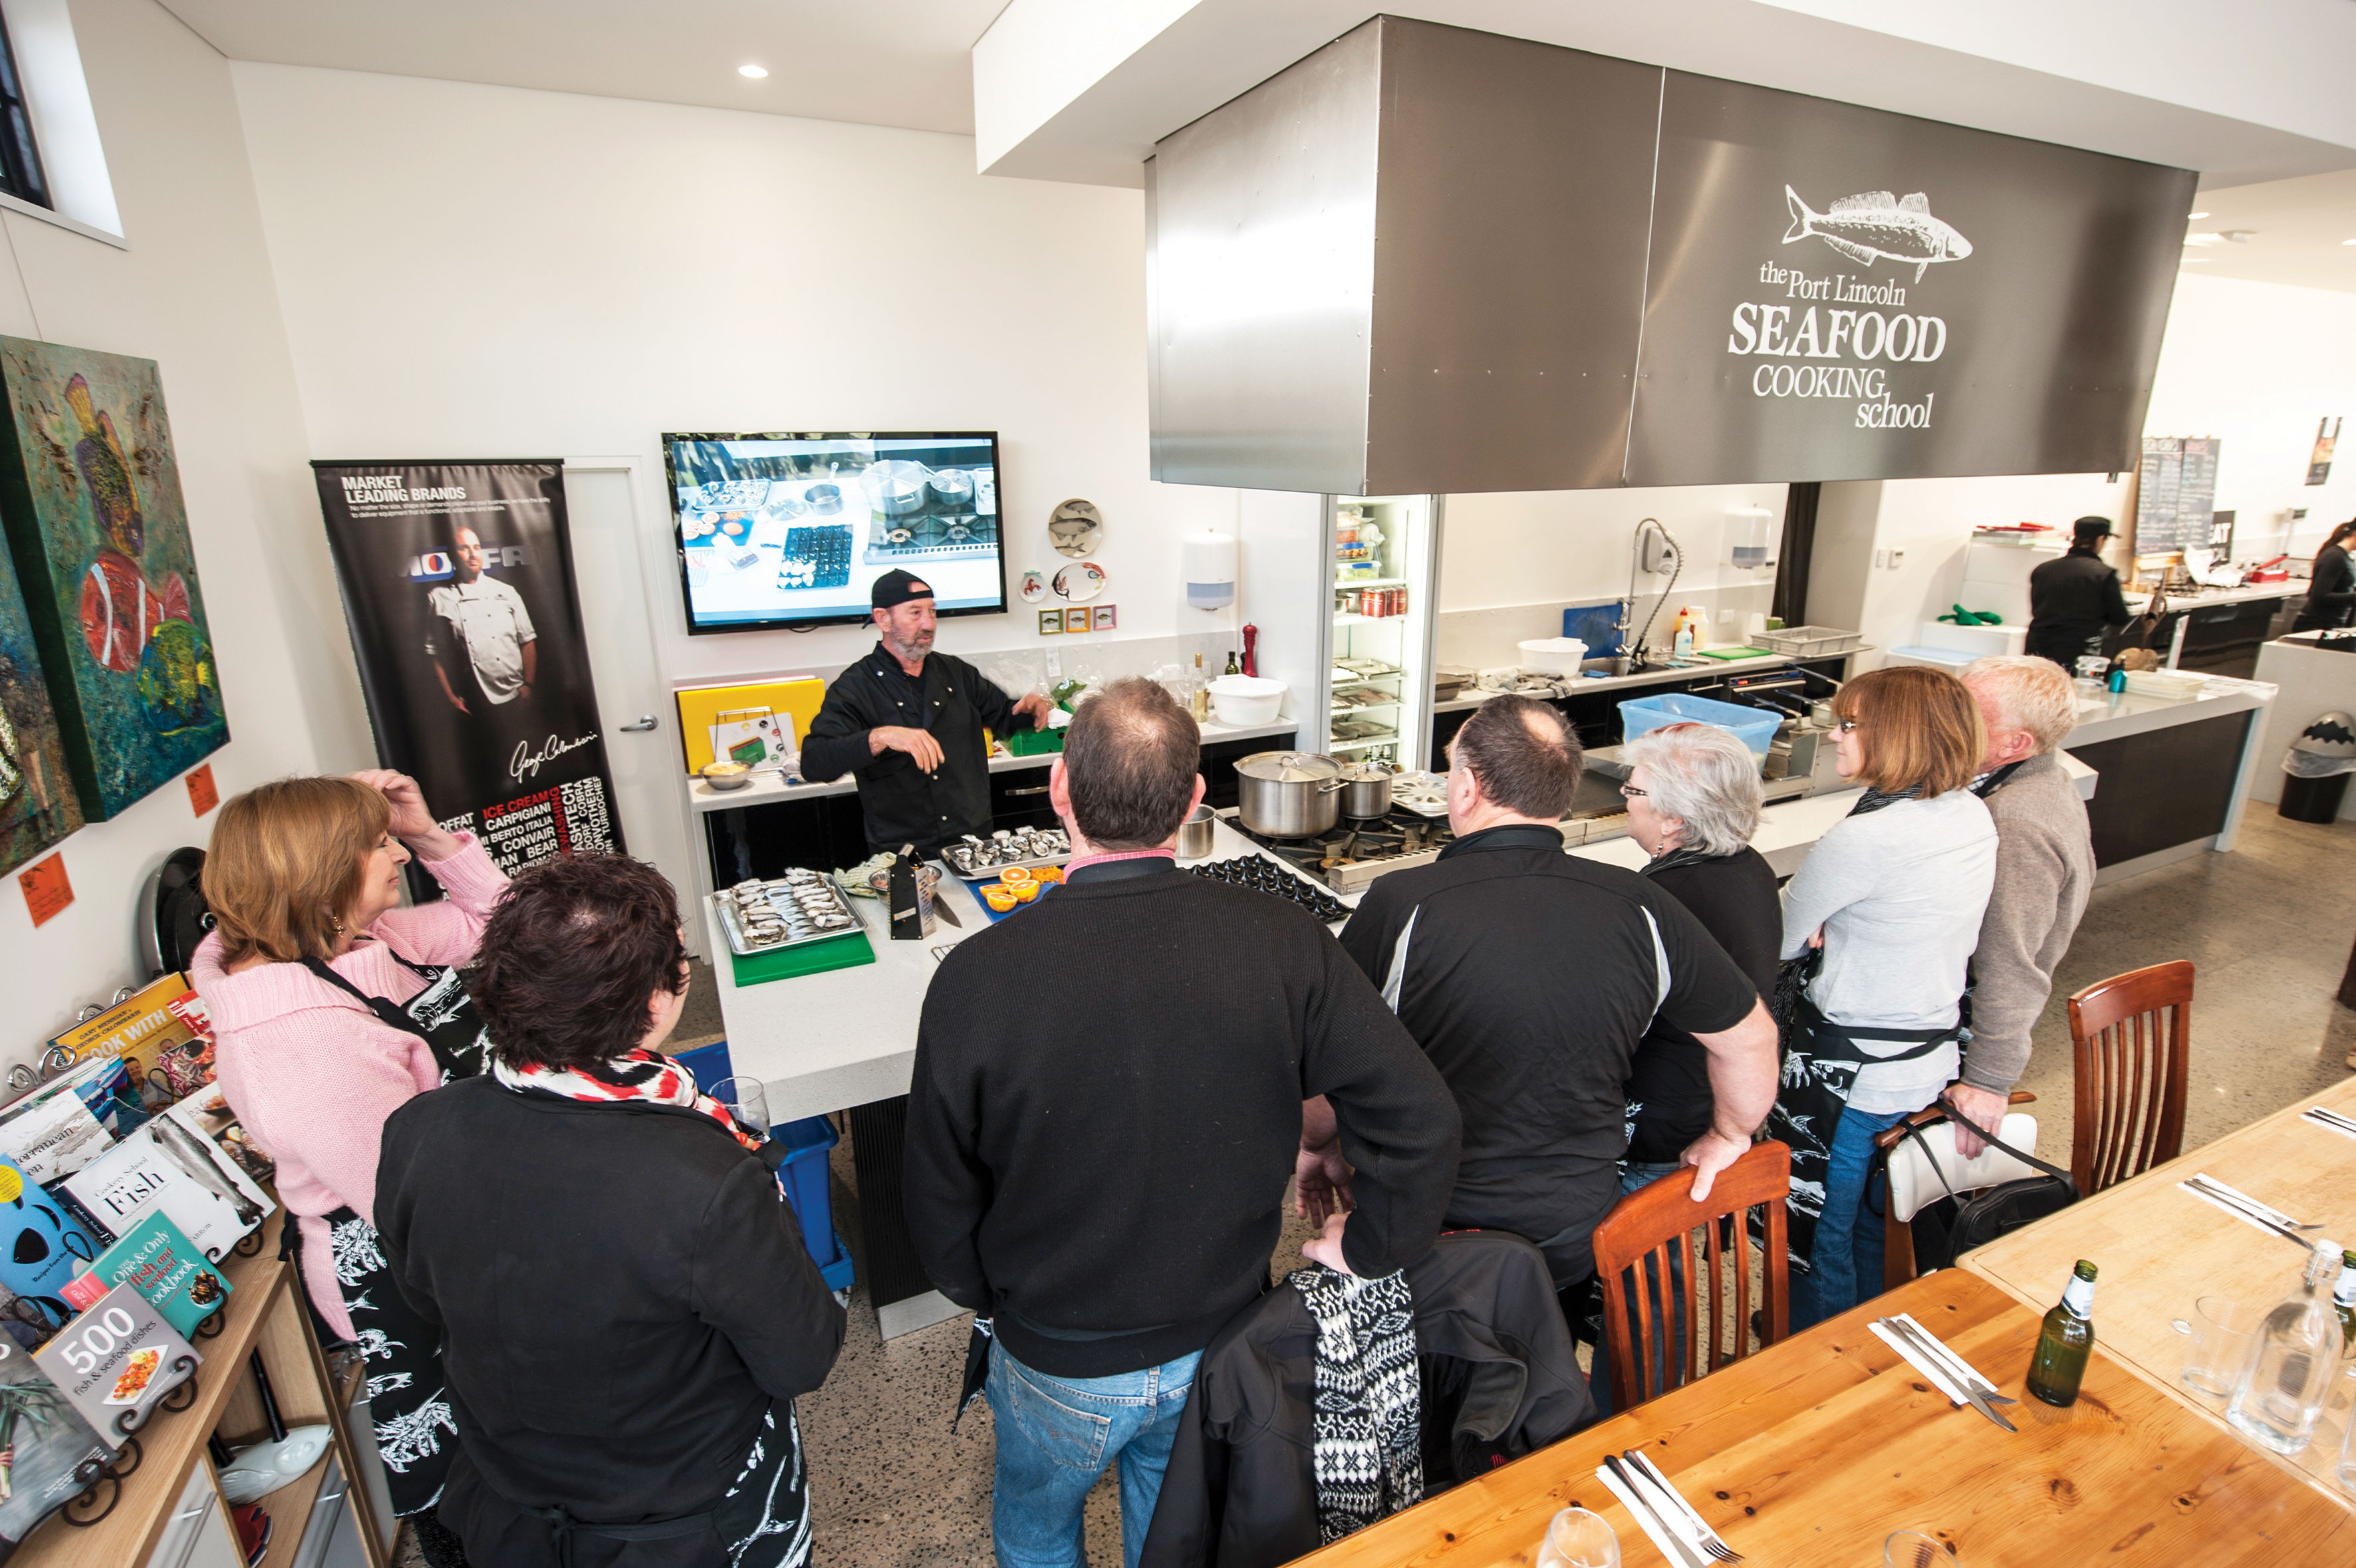 The Fresh Fish Place now offers factory tours, tasting experiences, ever-popular culinary classes, a homeware gallery and factory direct produce.